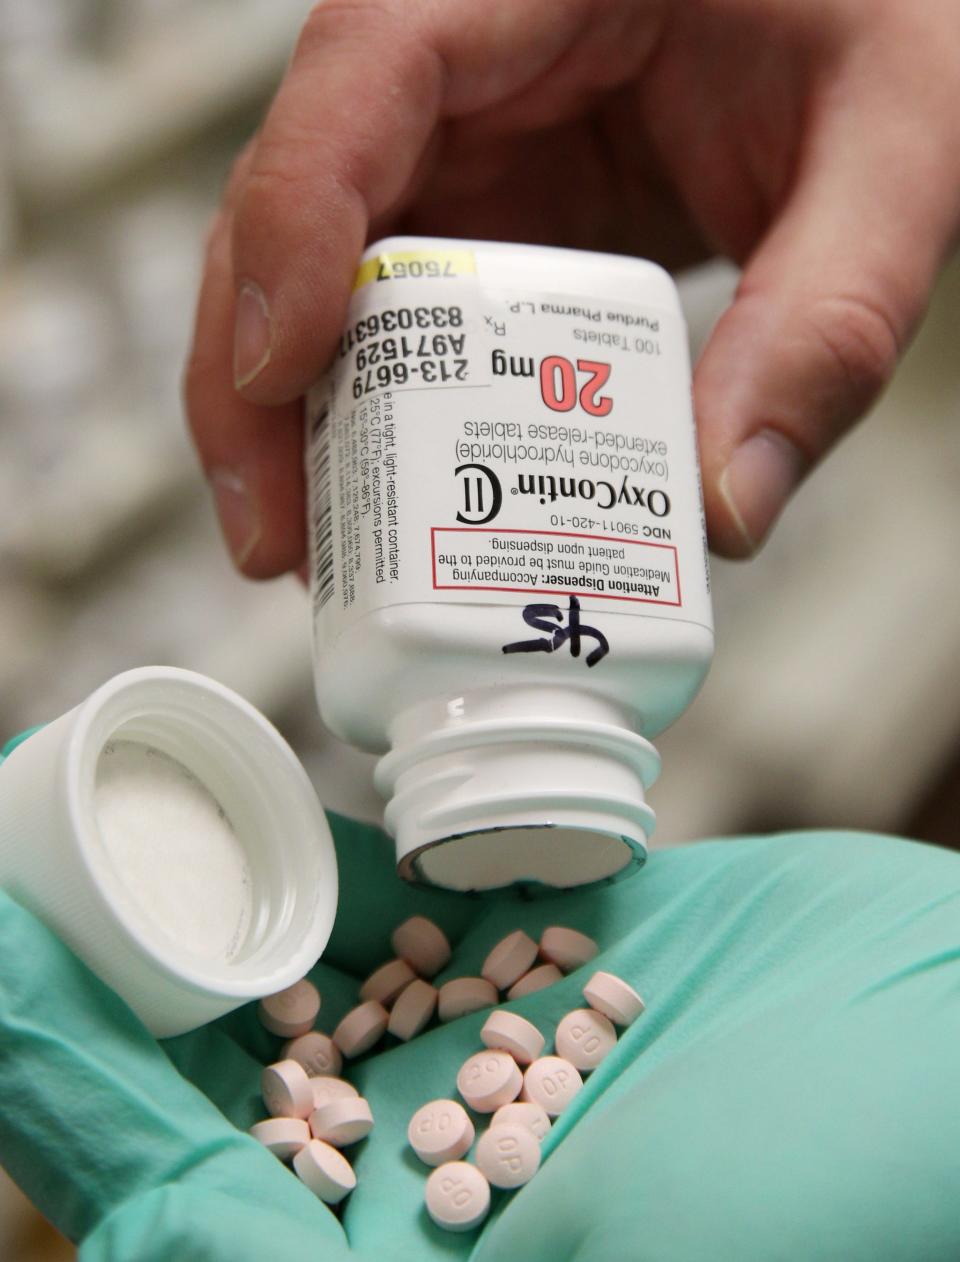 A pharmacist holds OxyContin pills made by Purdue Pharma at a pharmacy in Provo, Utah, U.S., May 9, 2019.